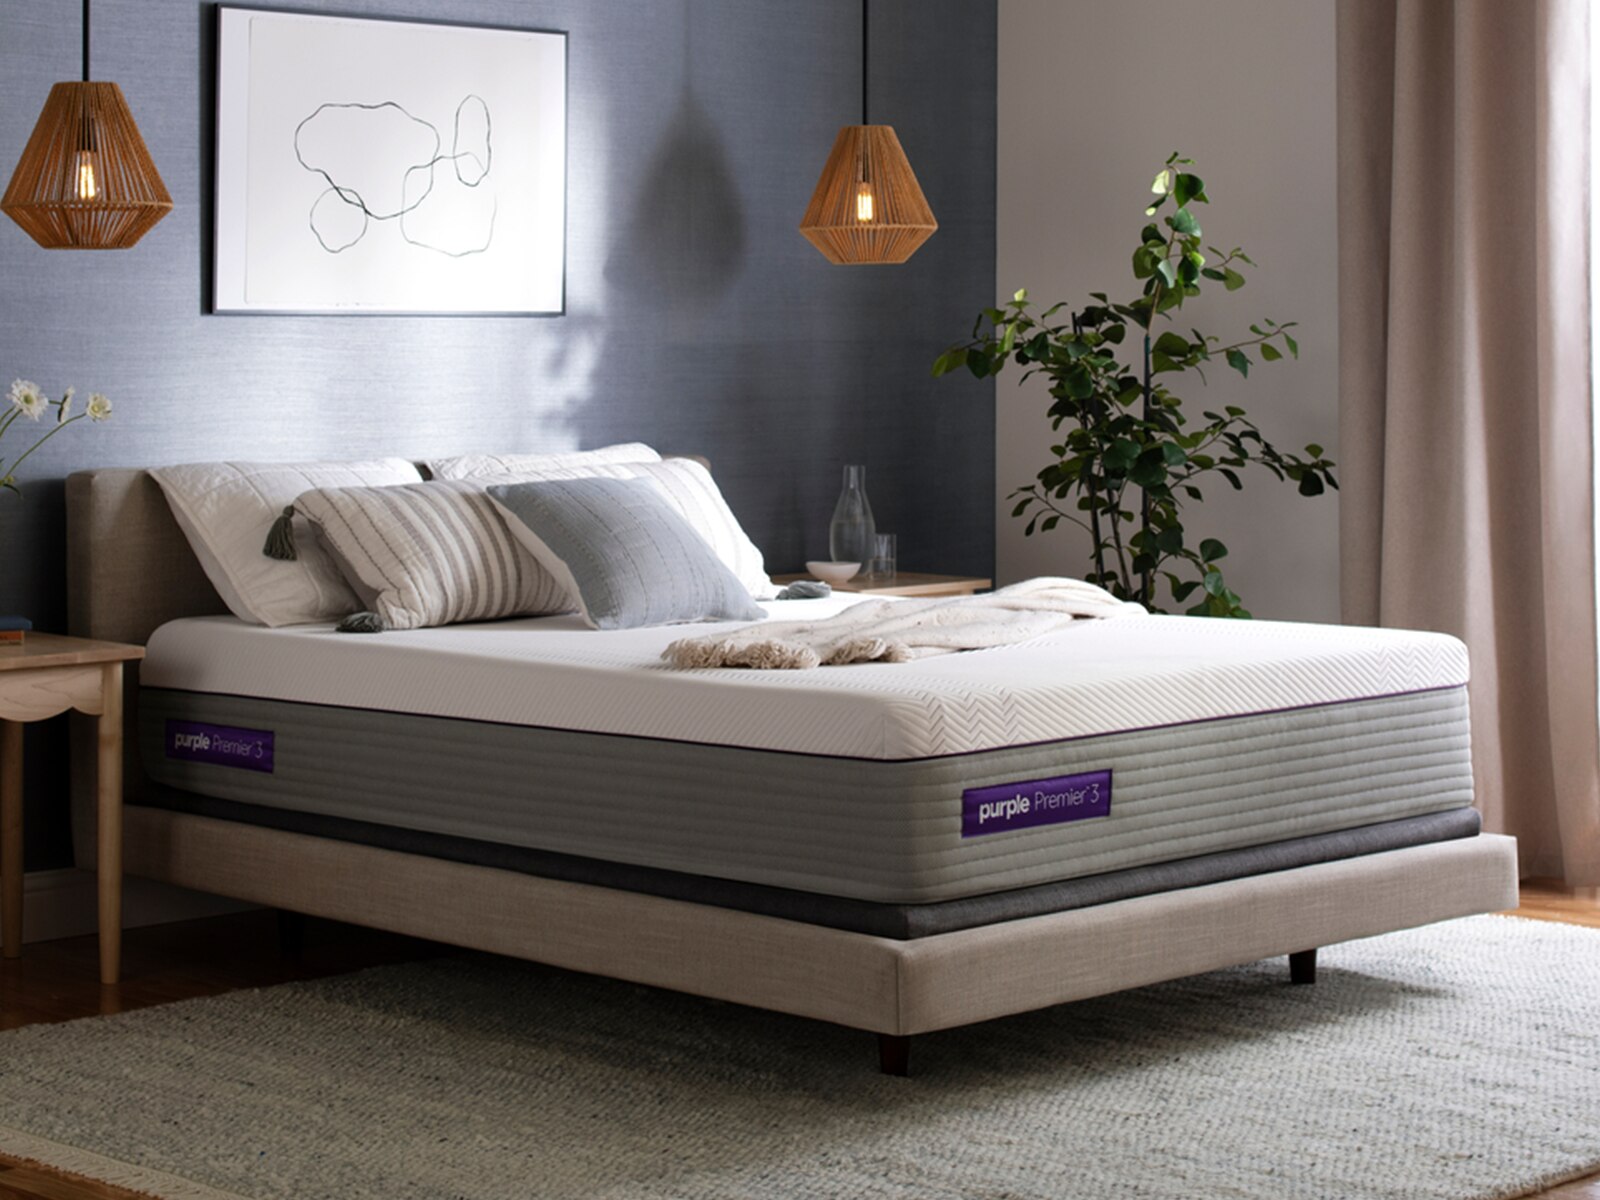 more back pain with purple 3 mattress